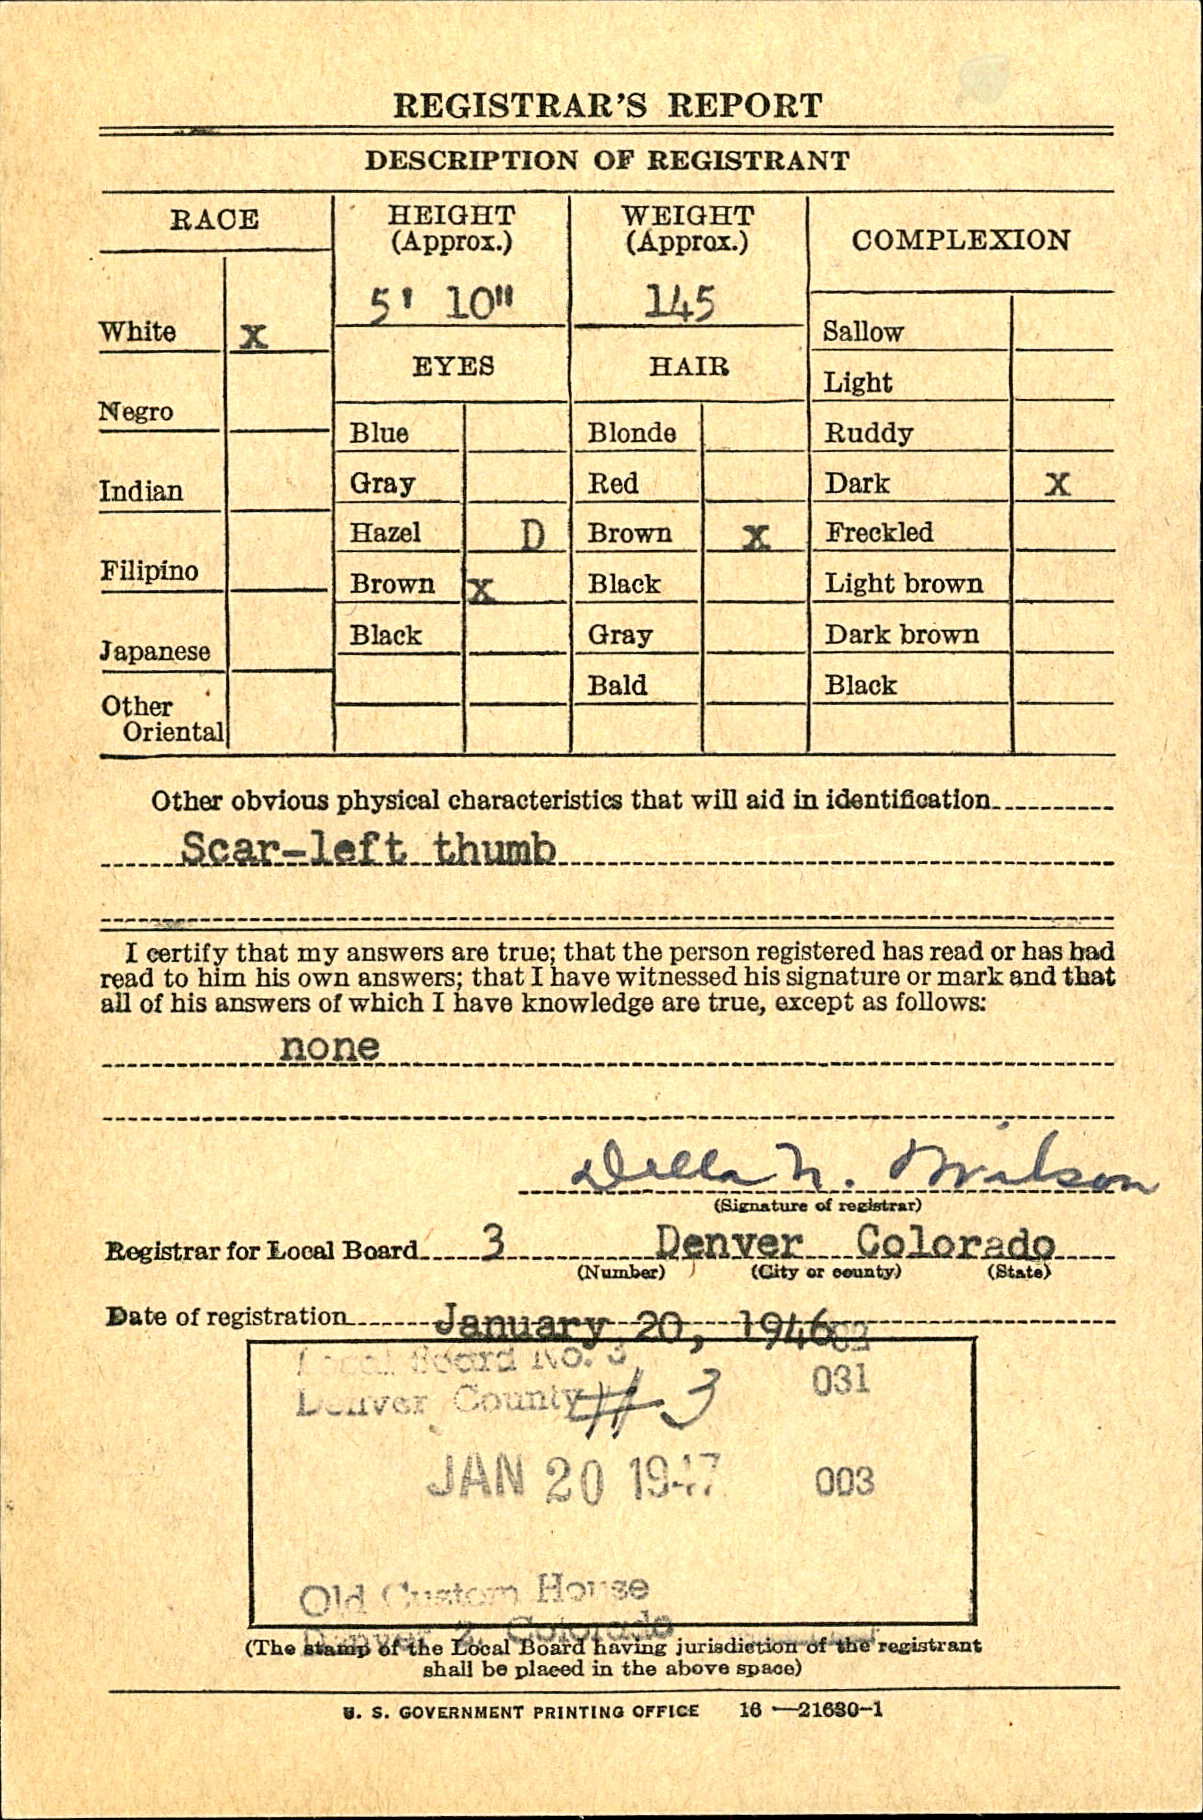 World War II draft card of Andrew Paul Mahler, page 2